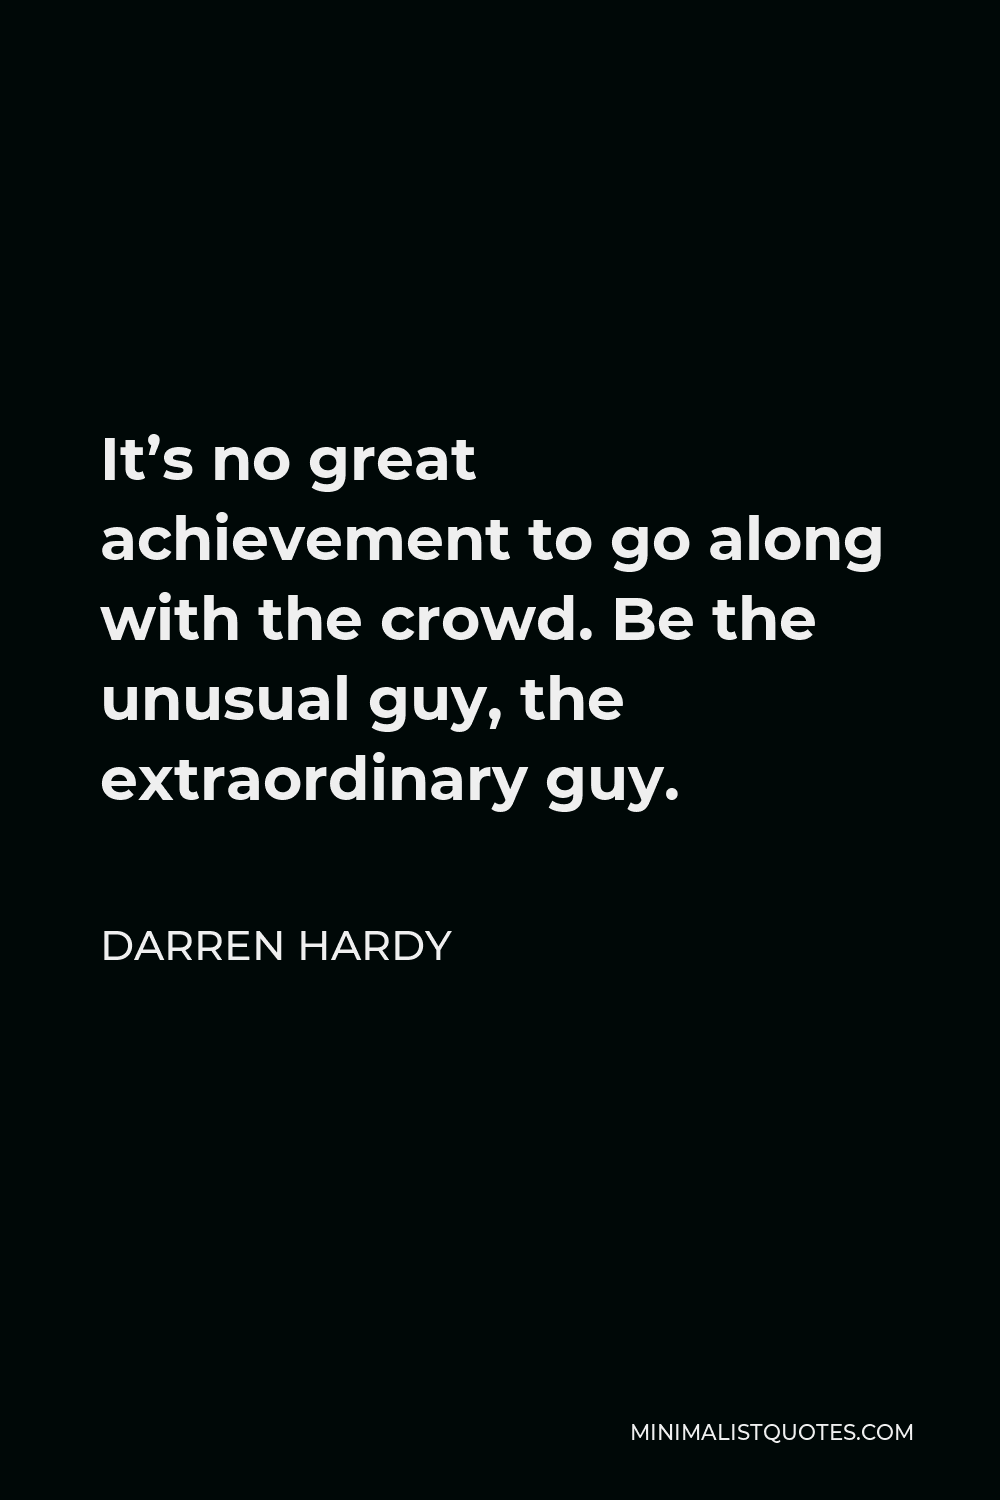 Darren Hardy Quote - It’s no great achievement to go along with the crowd. Be the unusual guy, the extraordinary guy.